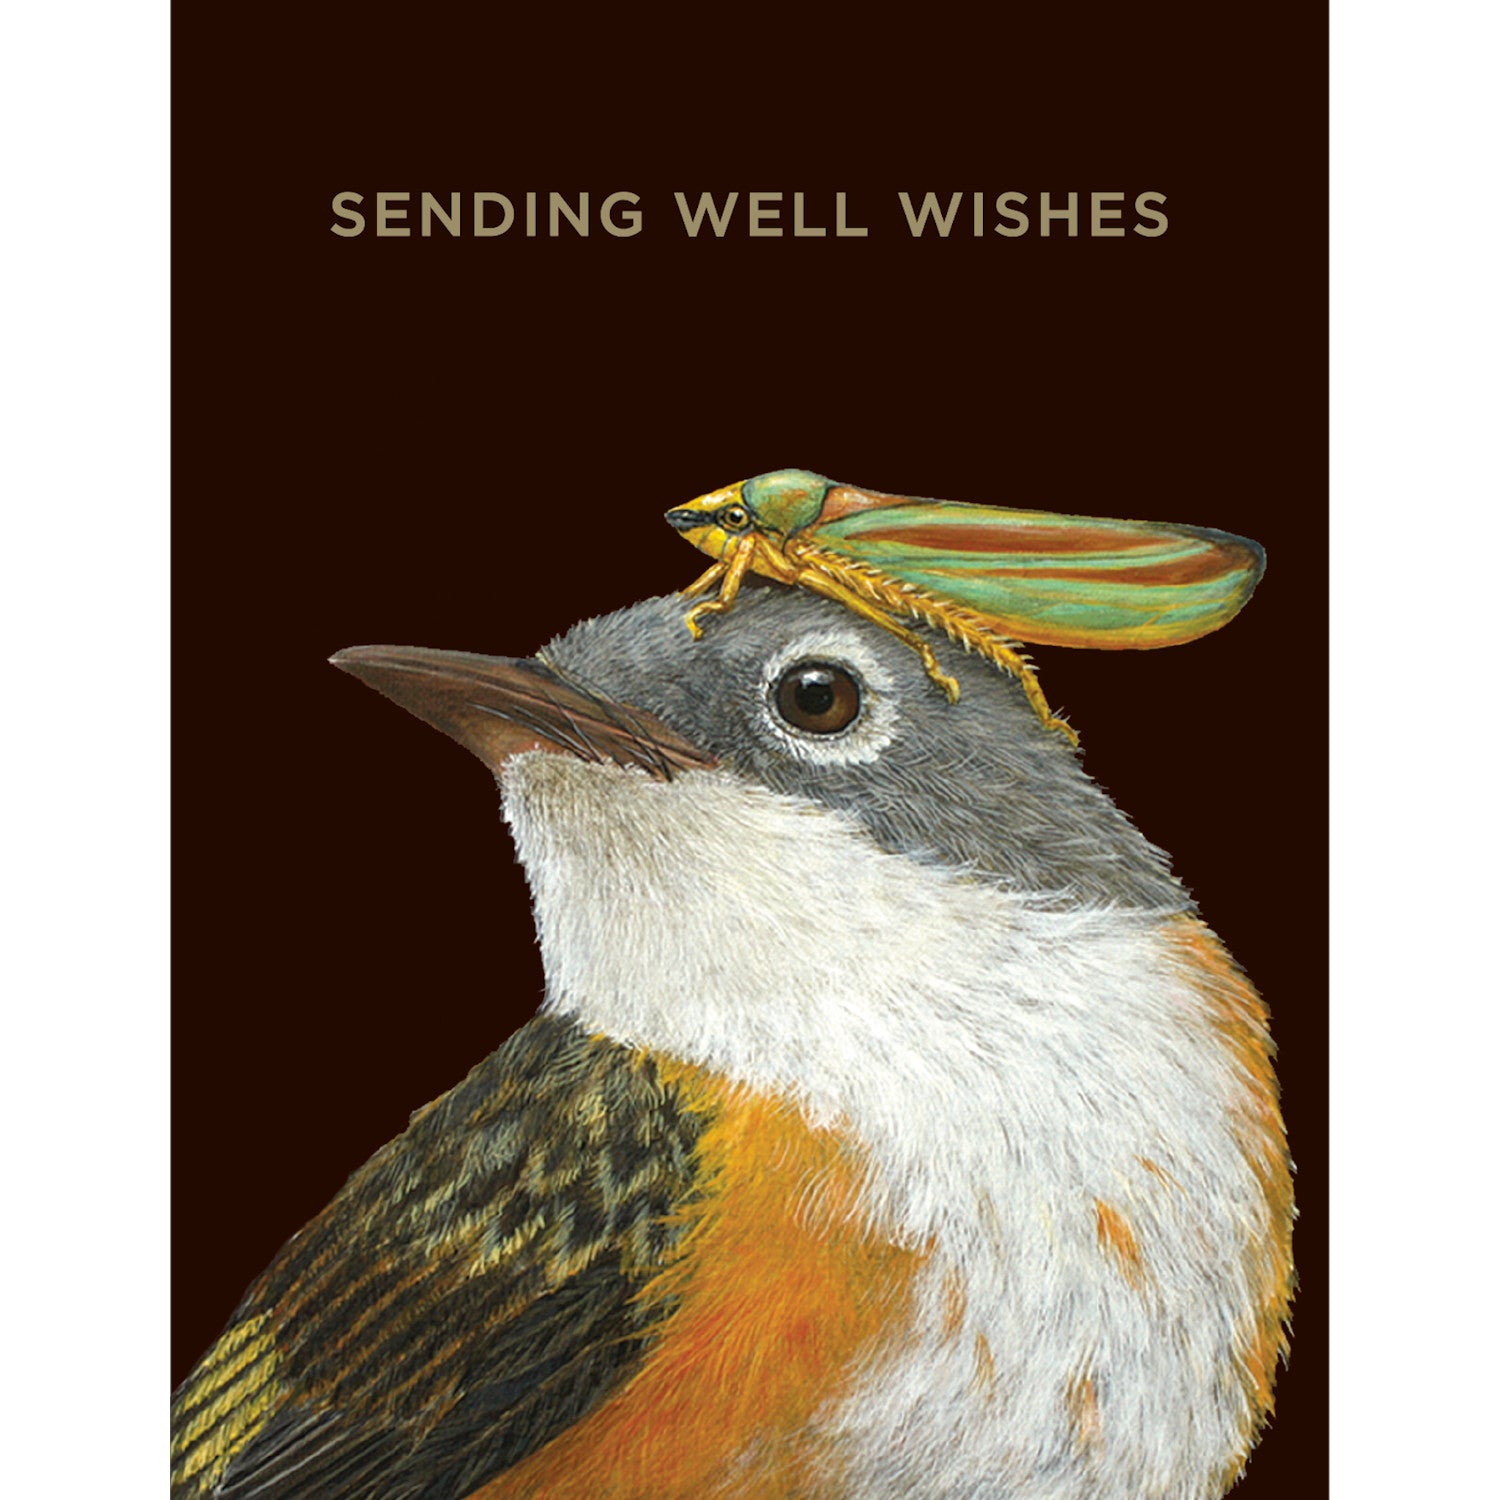 A stunning Well Wishes Warbler Card portraying a Warbler with a gold foil beetle on its head, beautifully conveying a message, brought to you by Hester &amp; Cook.